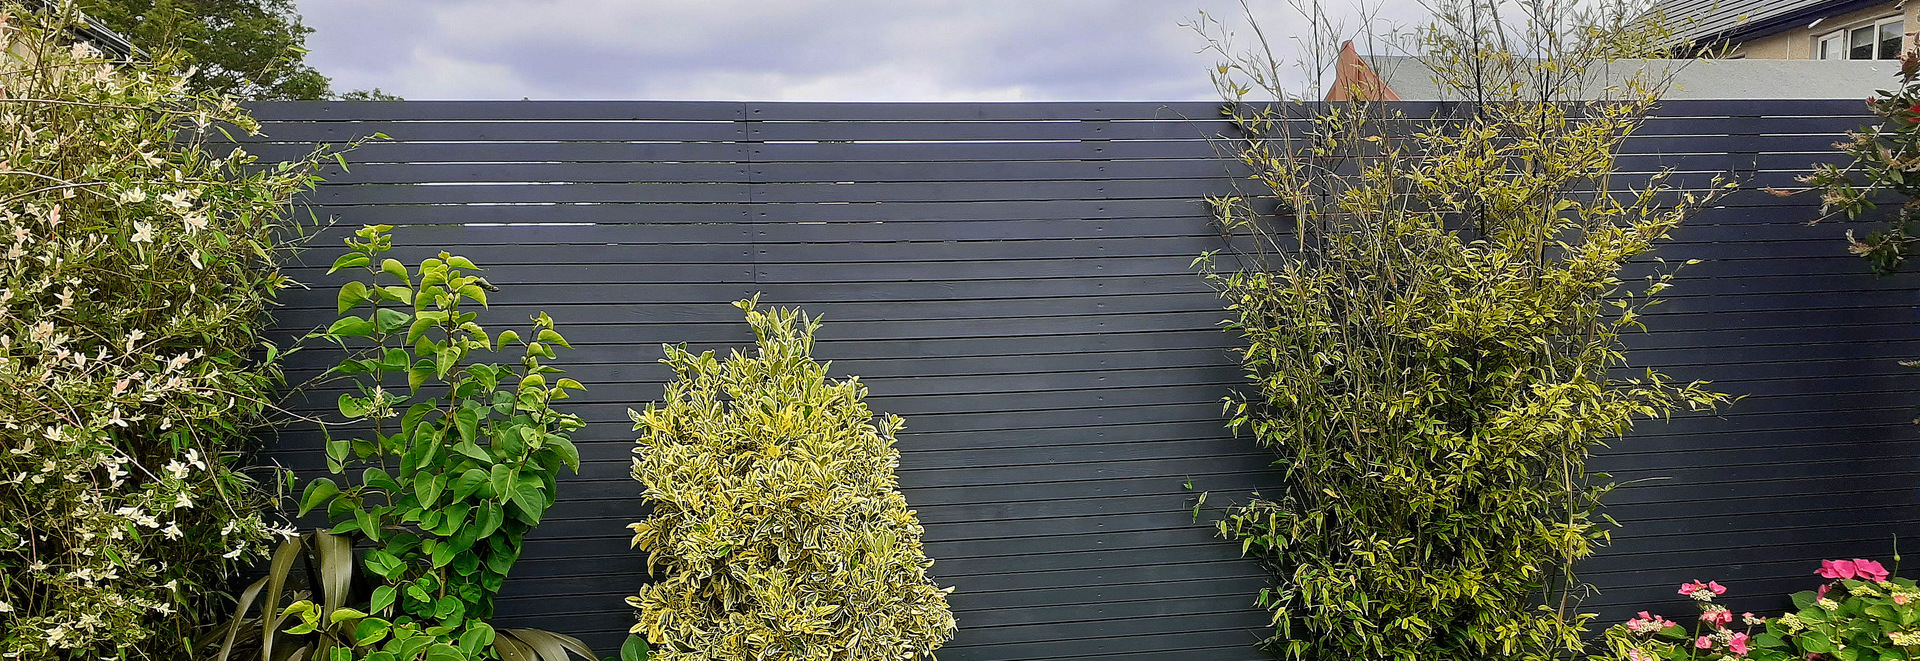 Custom made Timber Fencing featuring timber slats with painted (Colourtrends) finish, supply & installation in Ballycullen, Dublin 24 | Owen Chubb Garden Landscapers